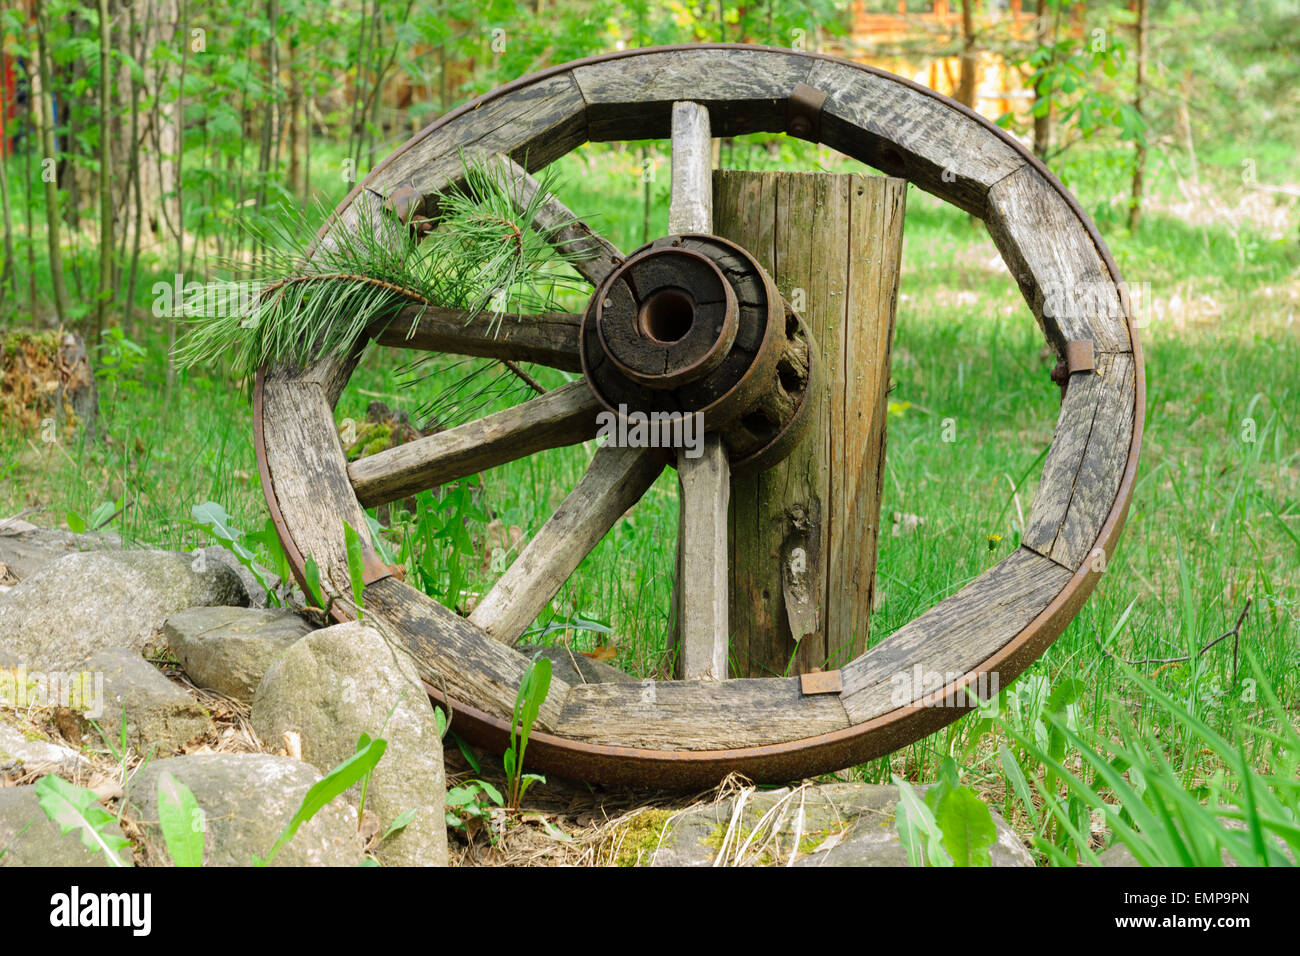 Old wooden wheel from a cart with a metal rim and spokes. Stock Photo